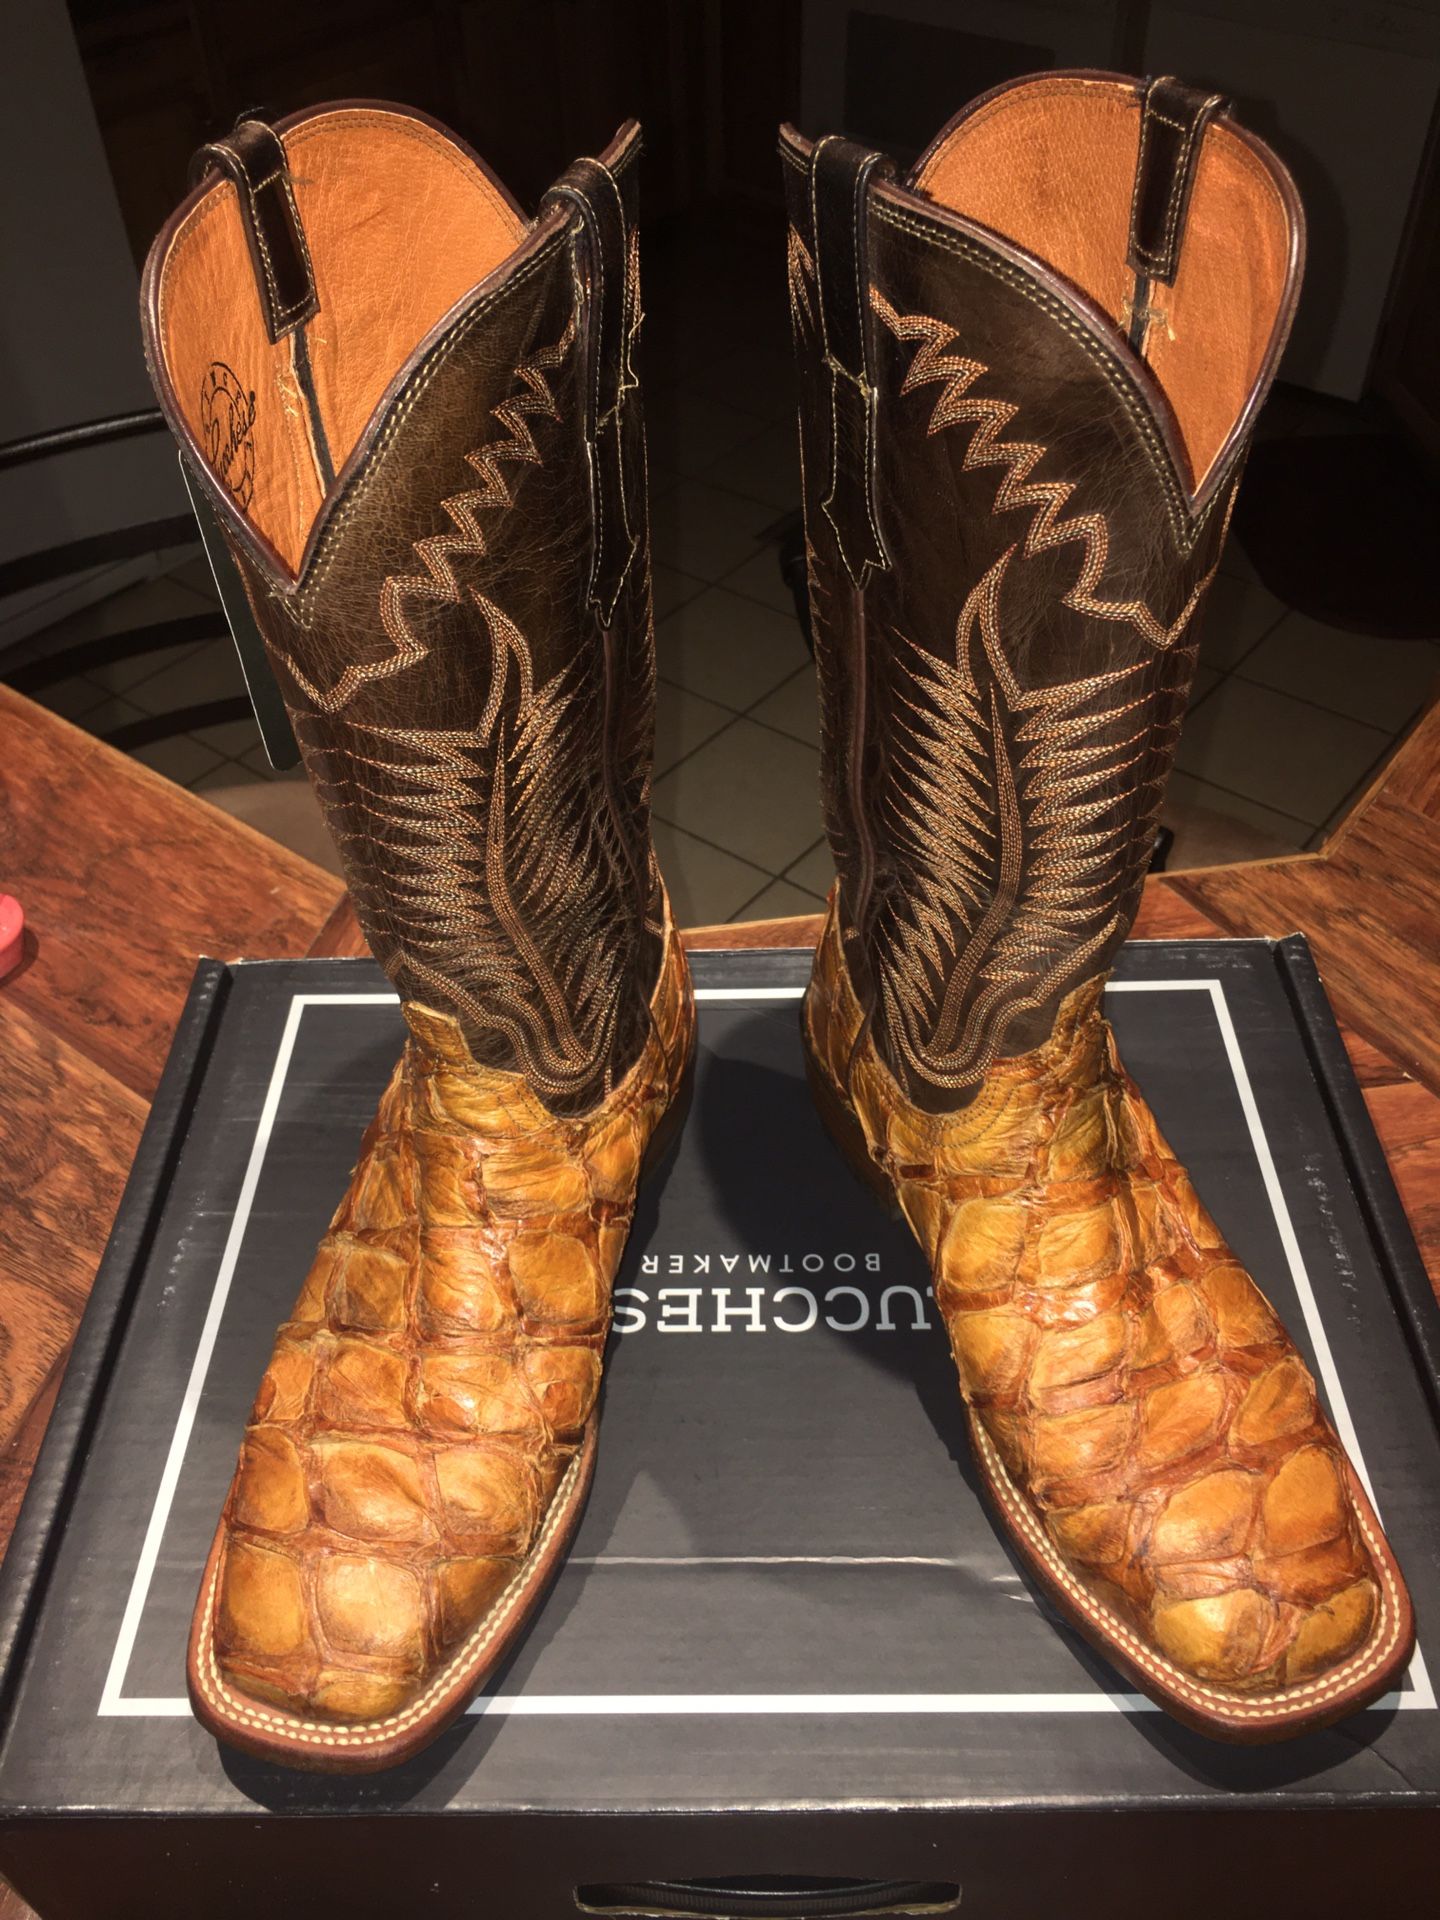 Lucchese cowboy boots